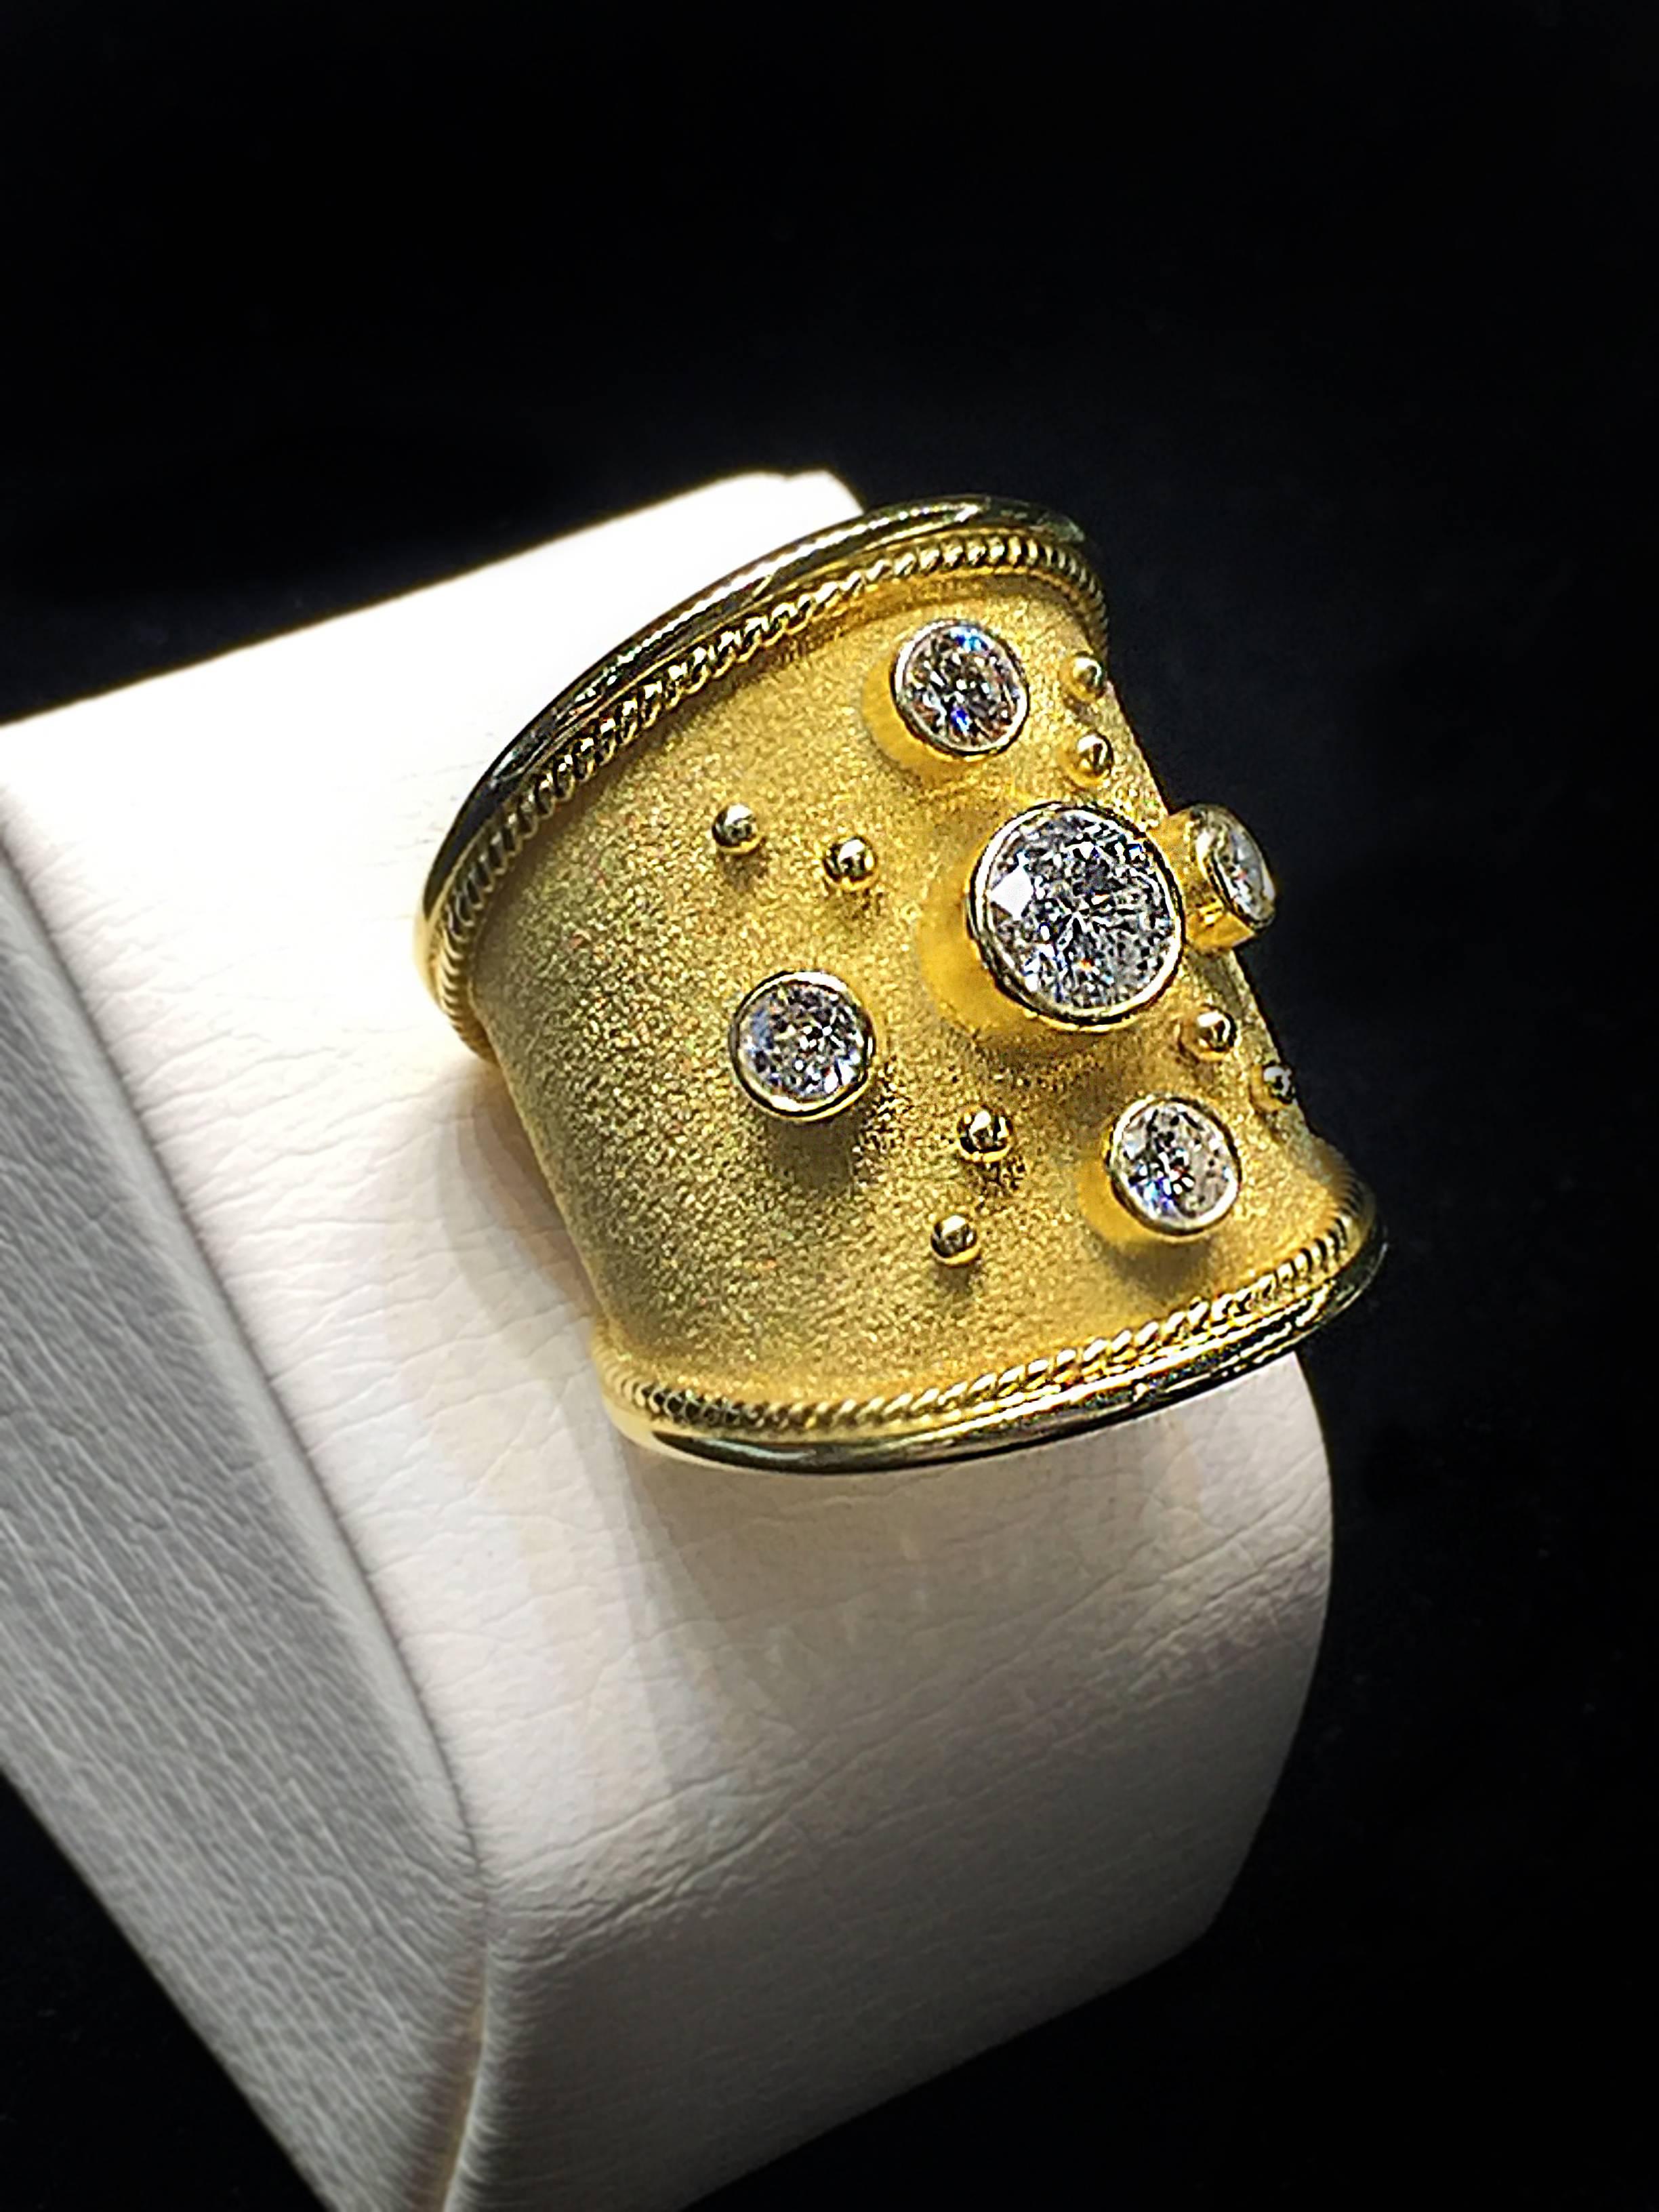 S.Georgios designer 18 Karat Yellow Gold Wide Band Ring is all hand made and has Byzantine granulation beads and wires from 22 Karat gold and a unique velvet look on the background done all microscopic. The gorgeous ring features a center Brilliant